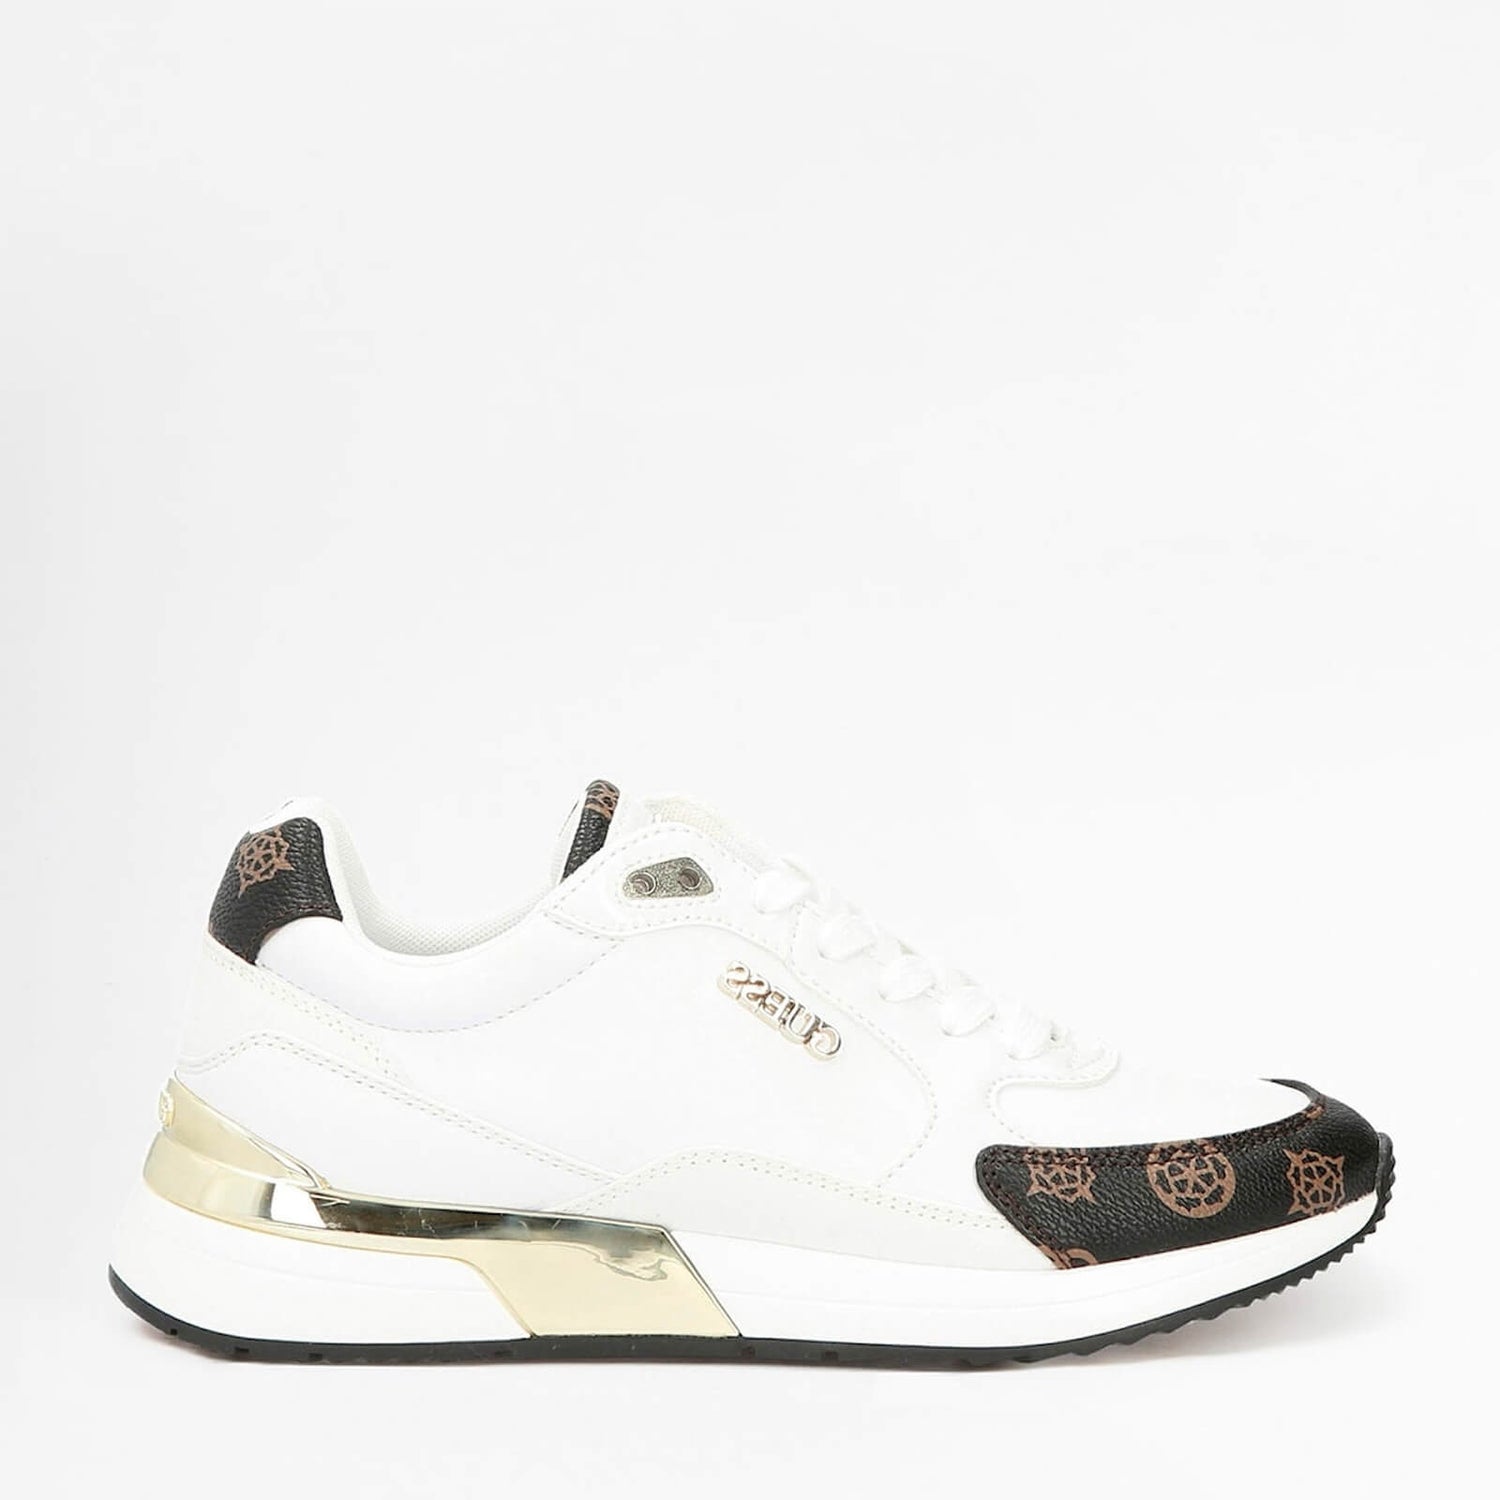 Guess Women's Moxea Leather Running Style Trainers - White/Brown - UK 3